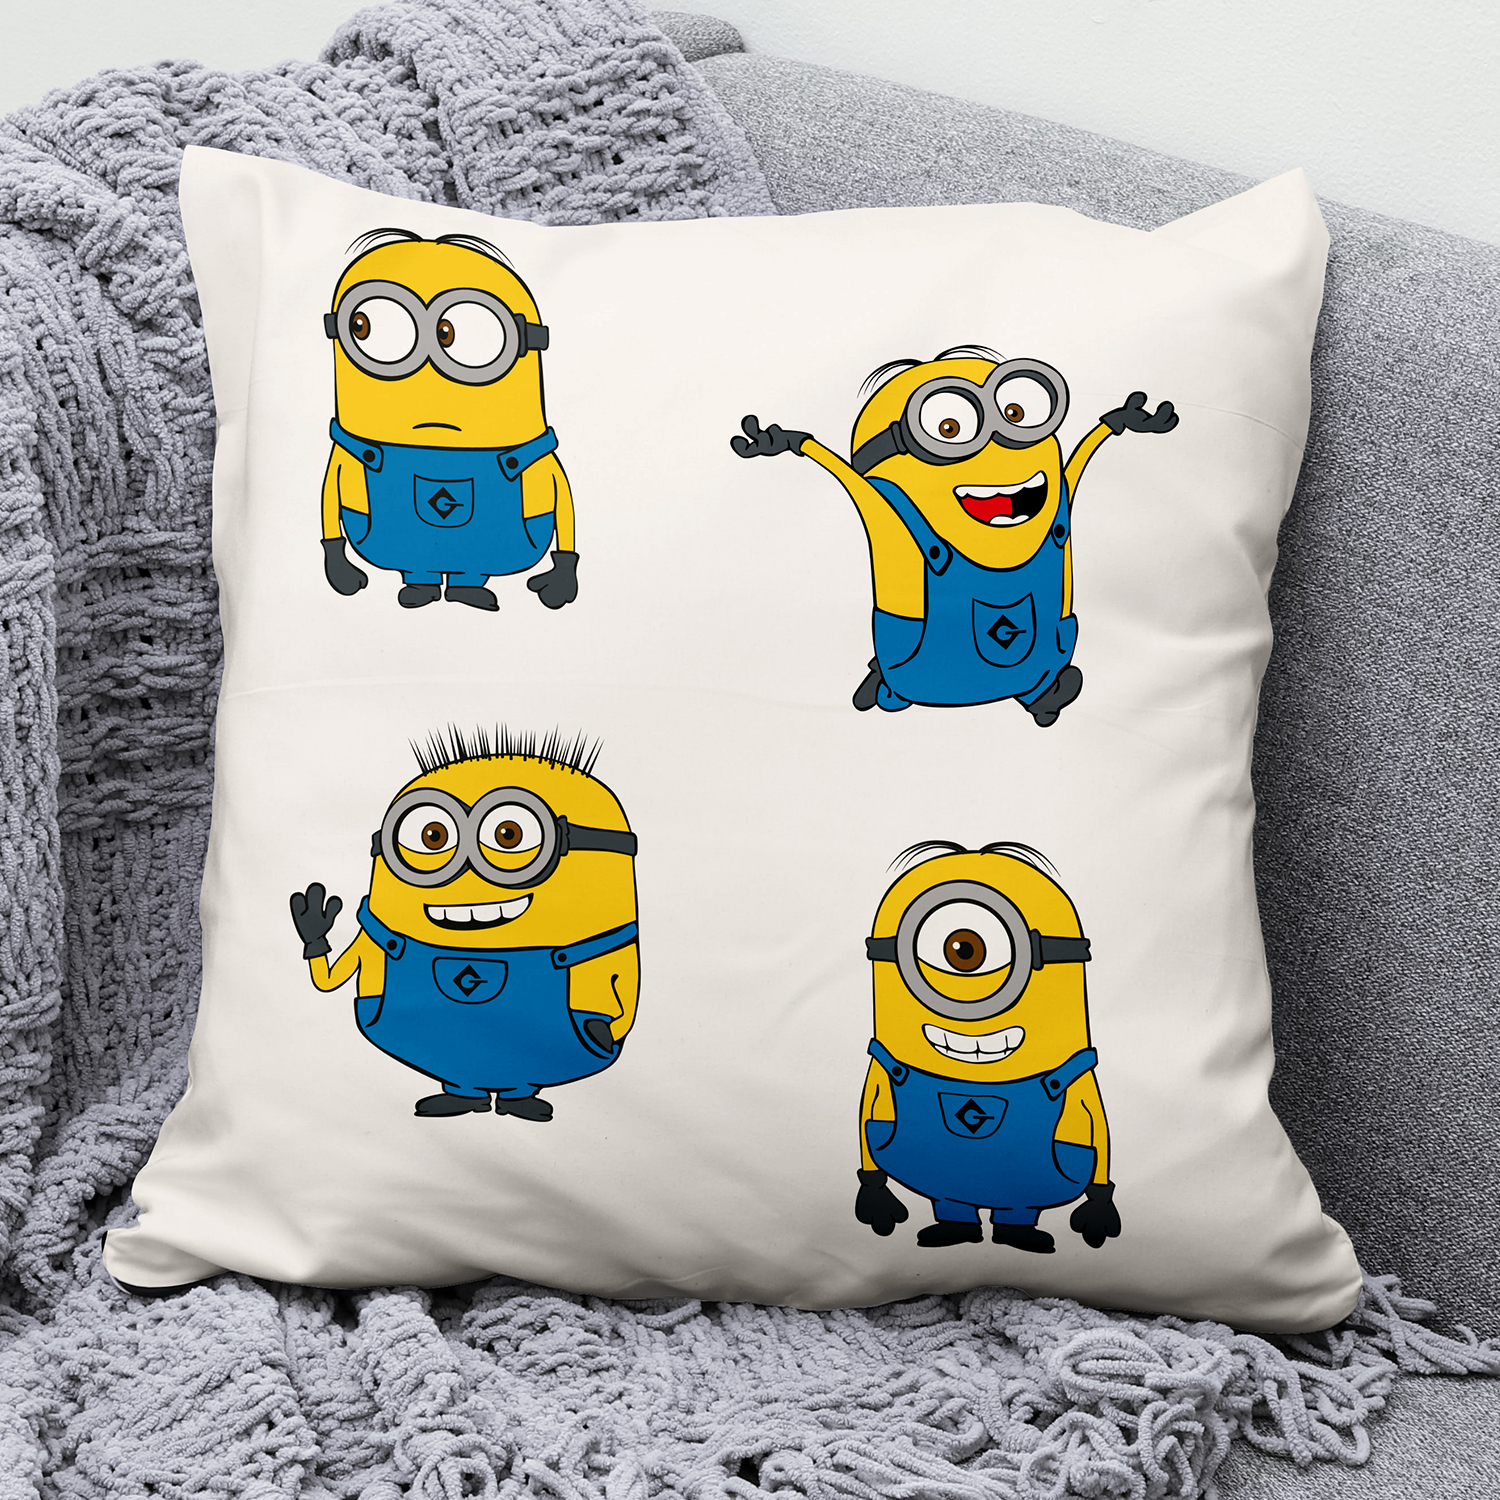 Print on a pillow with a minion.